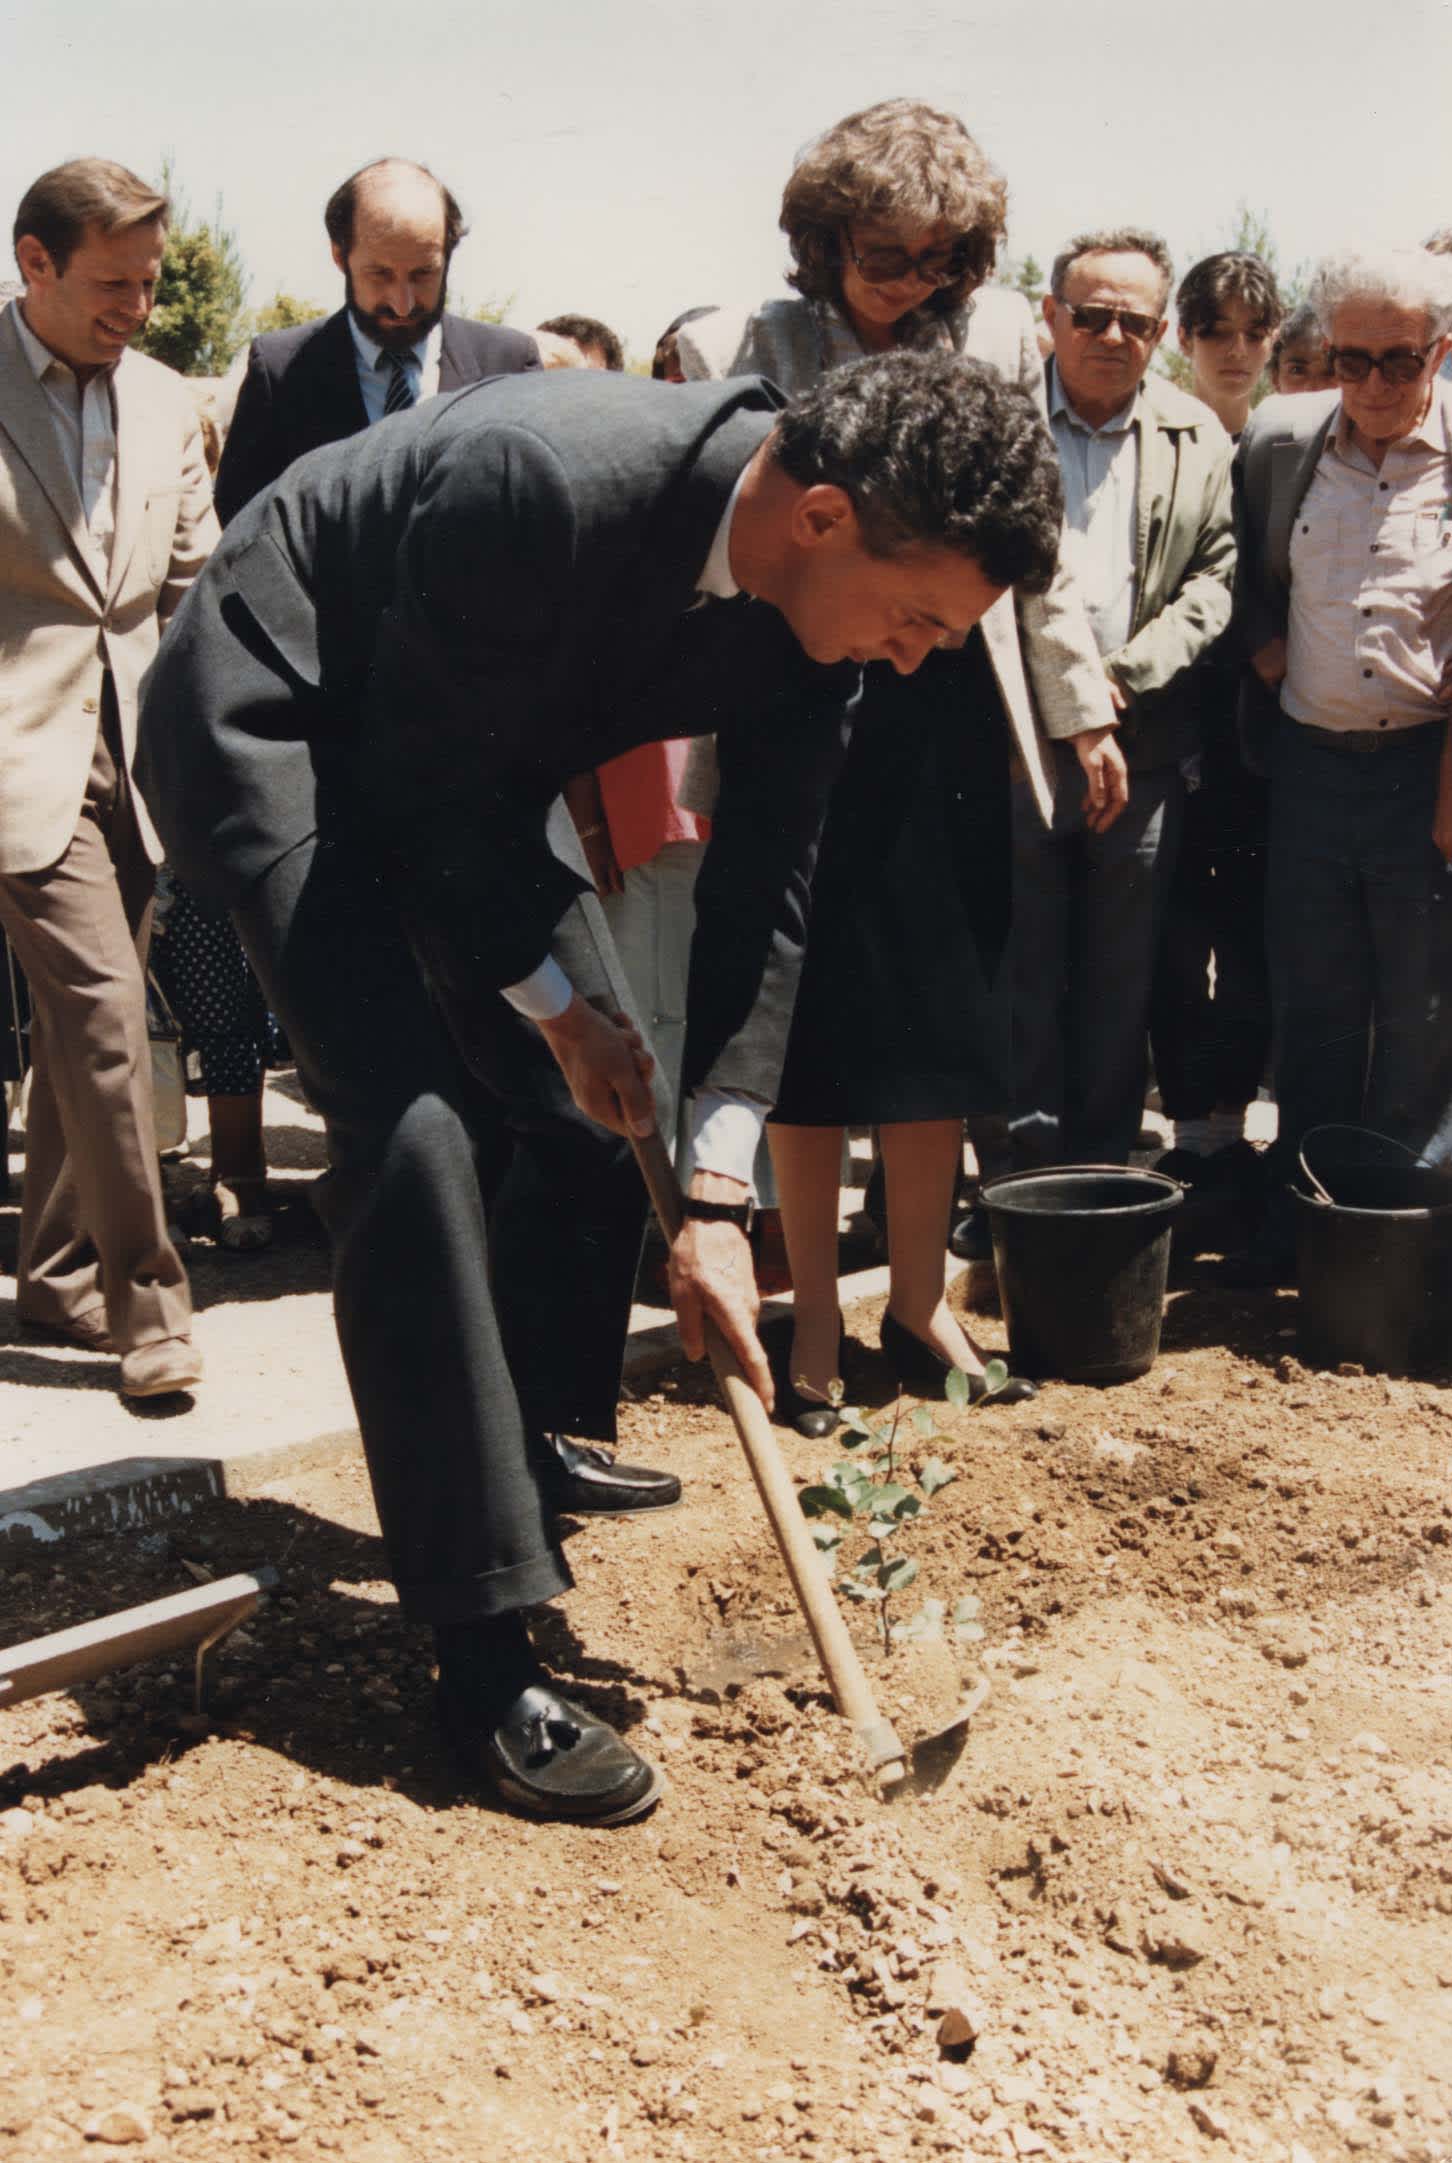 Planting Ceremony in honour of Friedrich Born